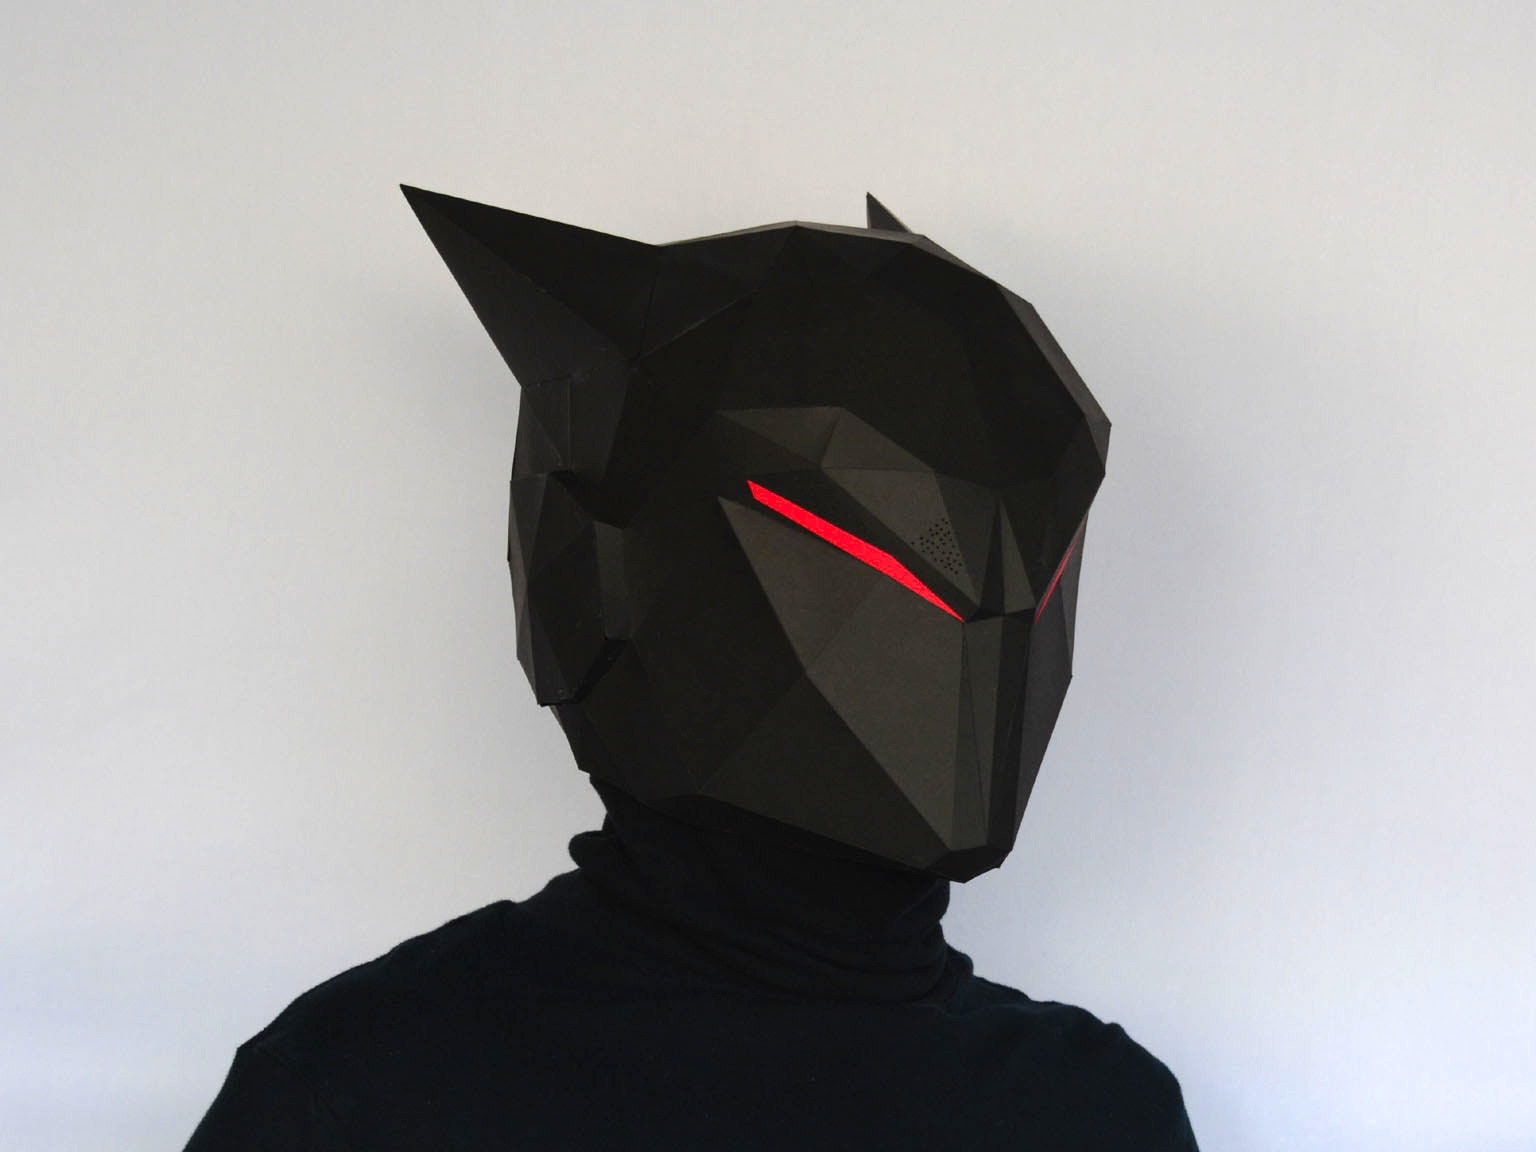 cool mask designs for boys